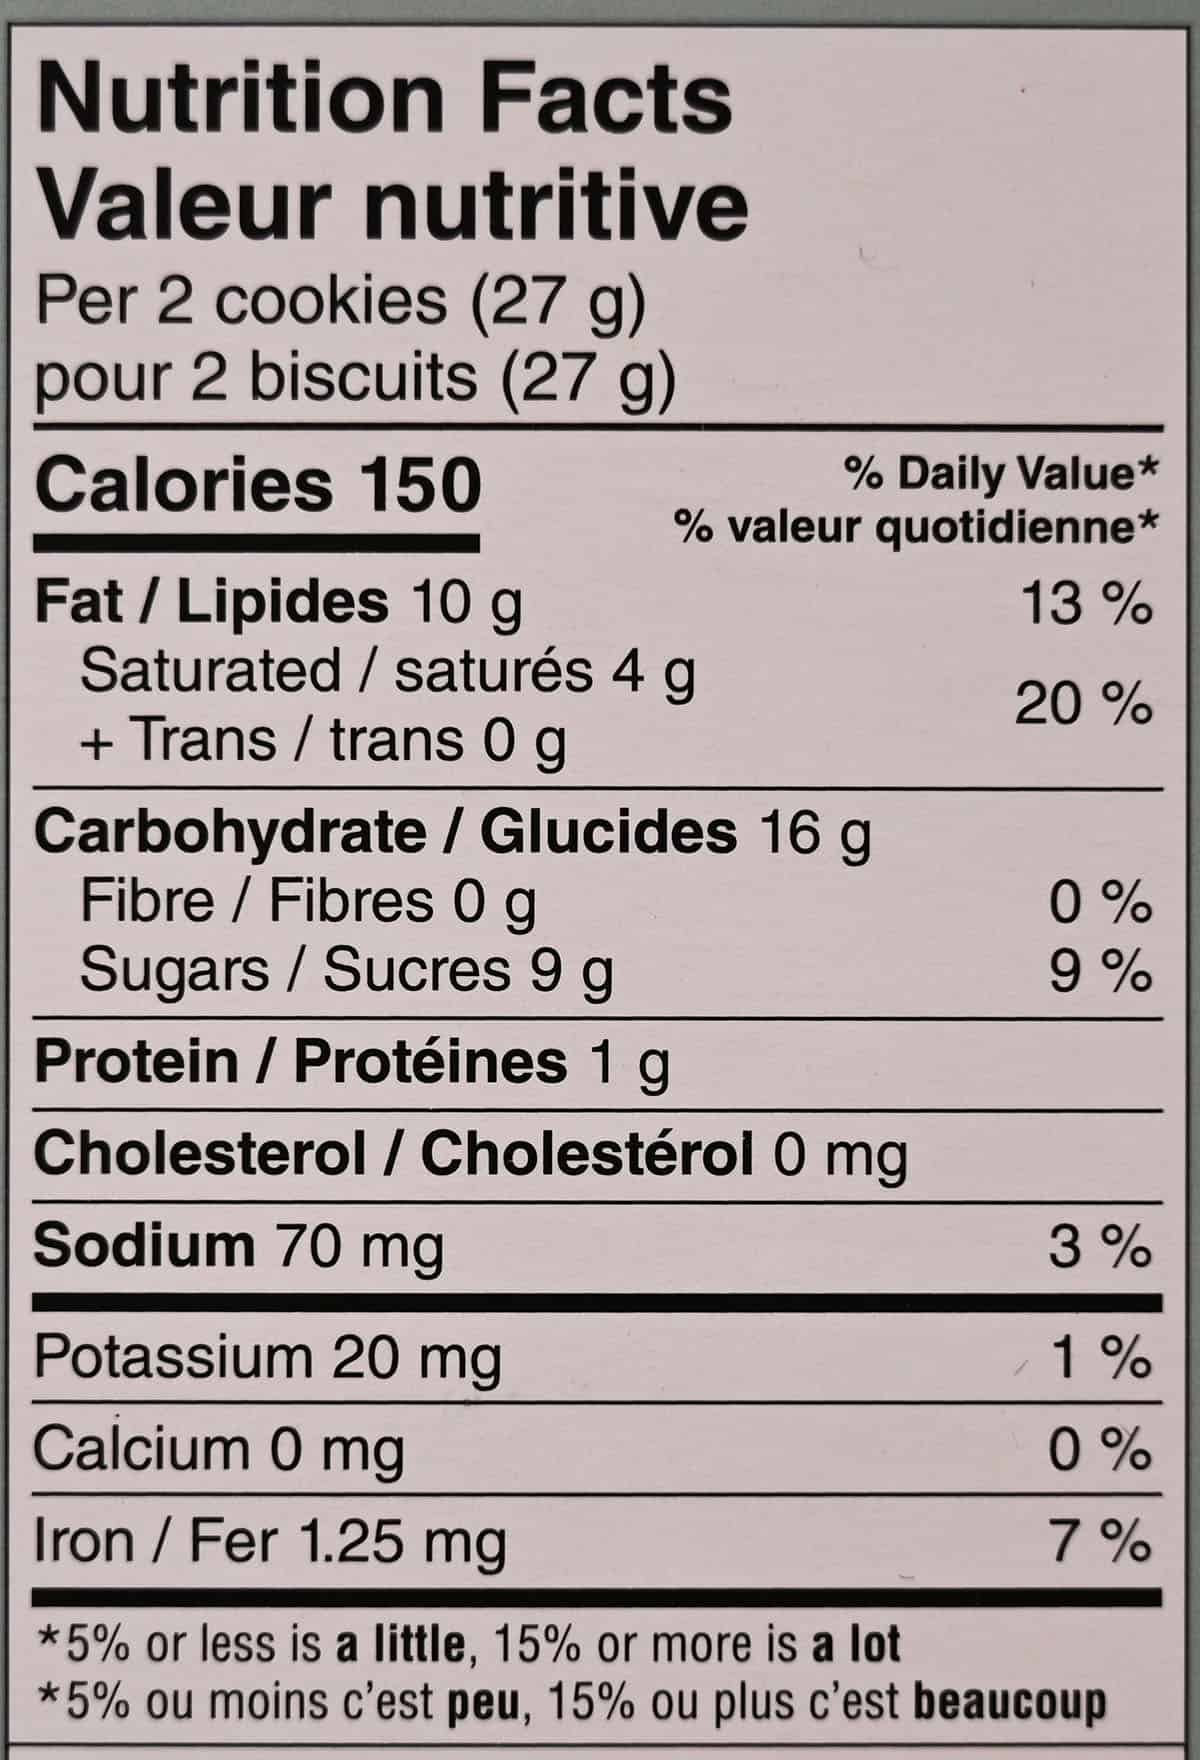 Image of the nutrition facts label for the pastries from the box.